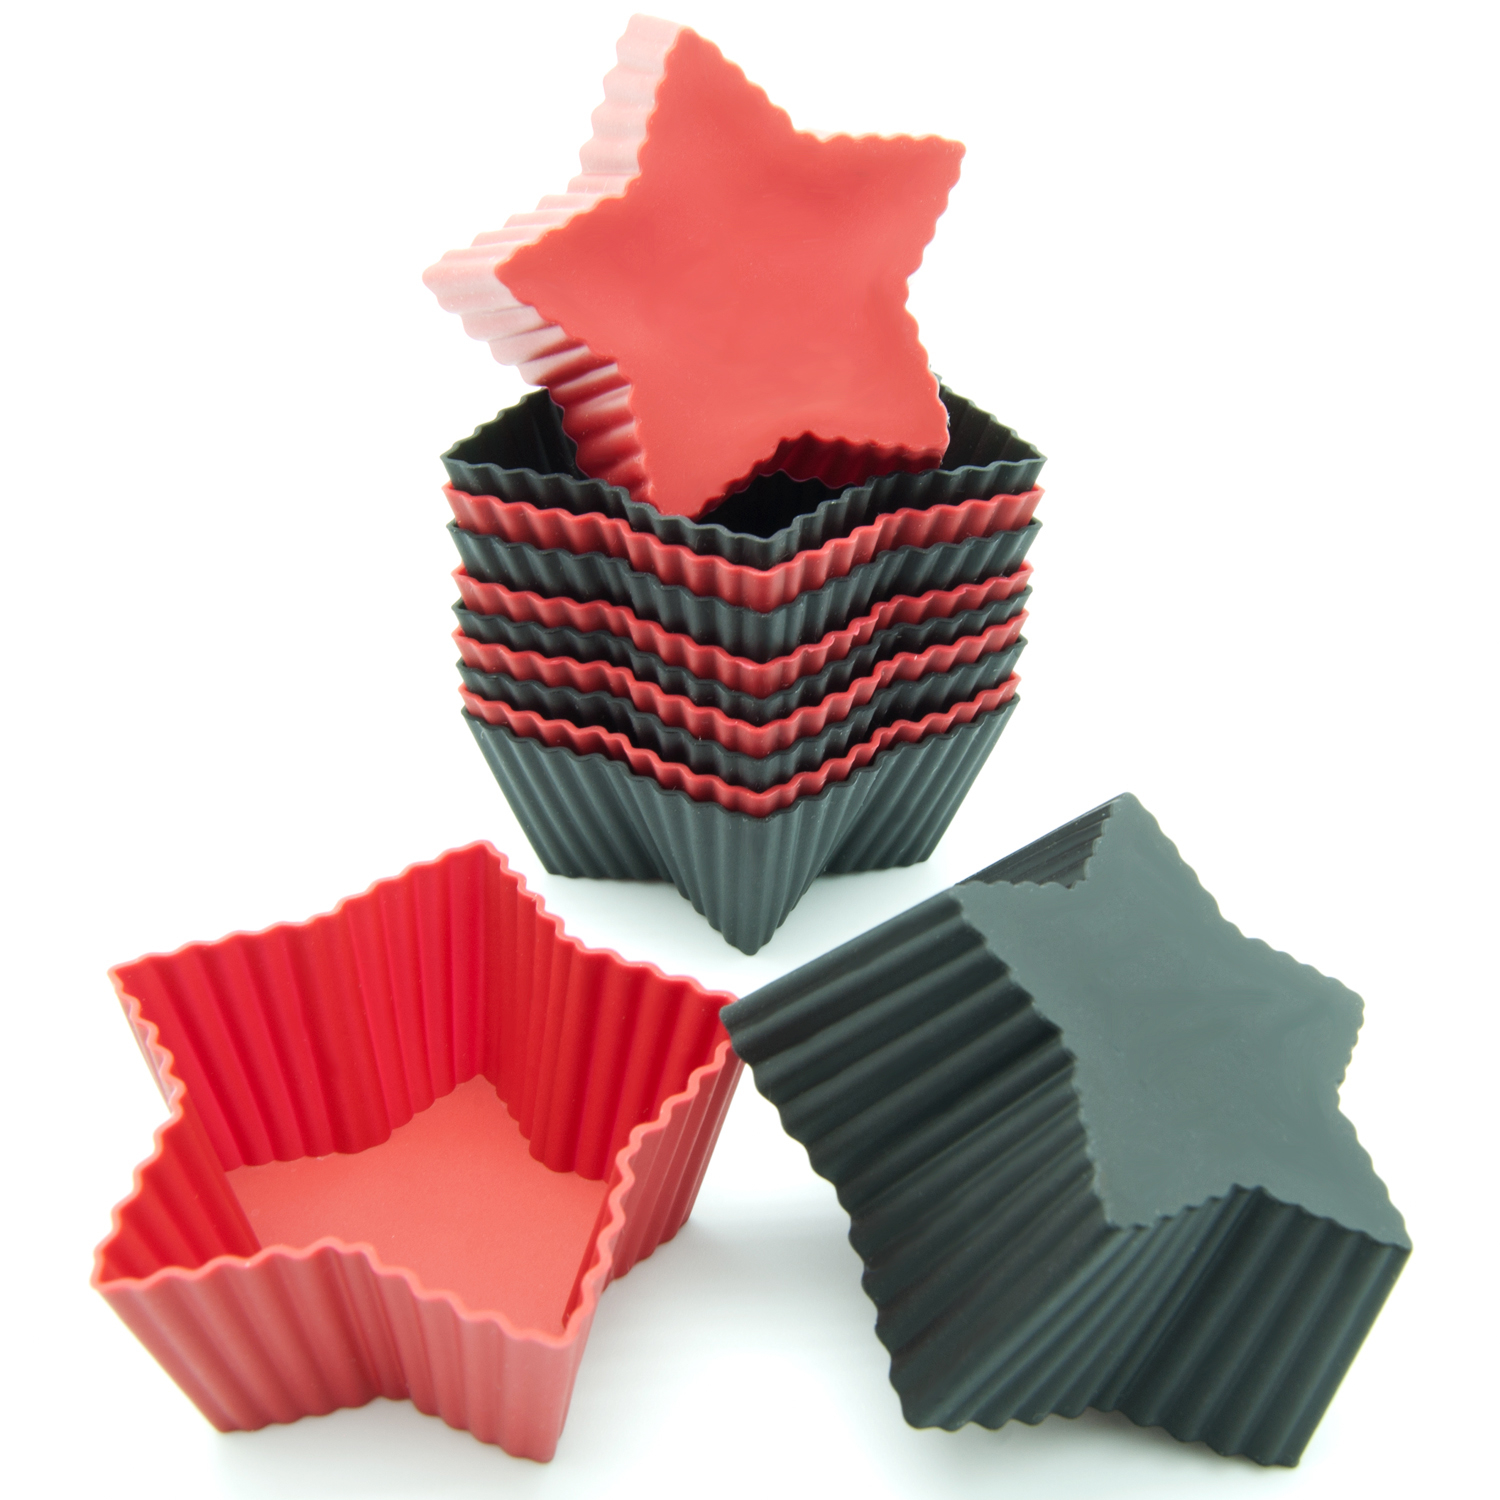 Freshware Silicone Cupcake Liners / Baking Cups - 12-Pack Muffin Molds, Star, Red and Black Colors